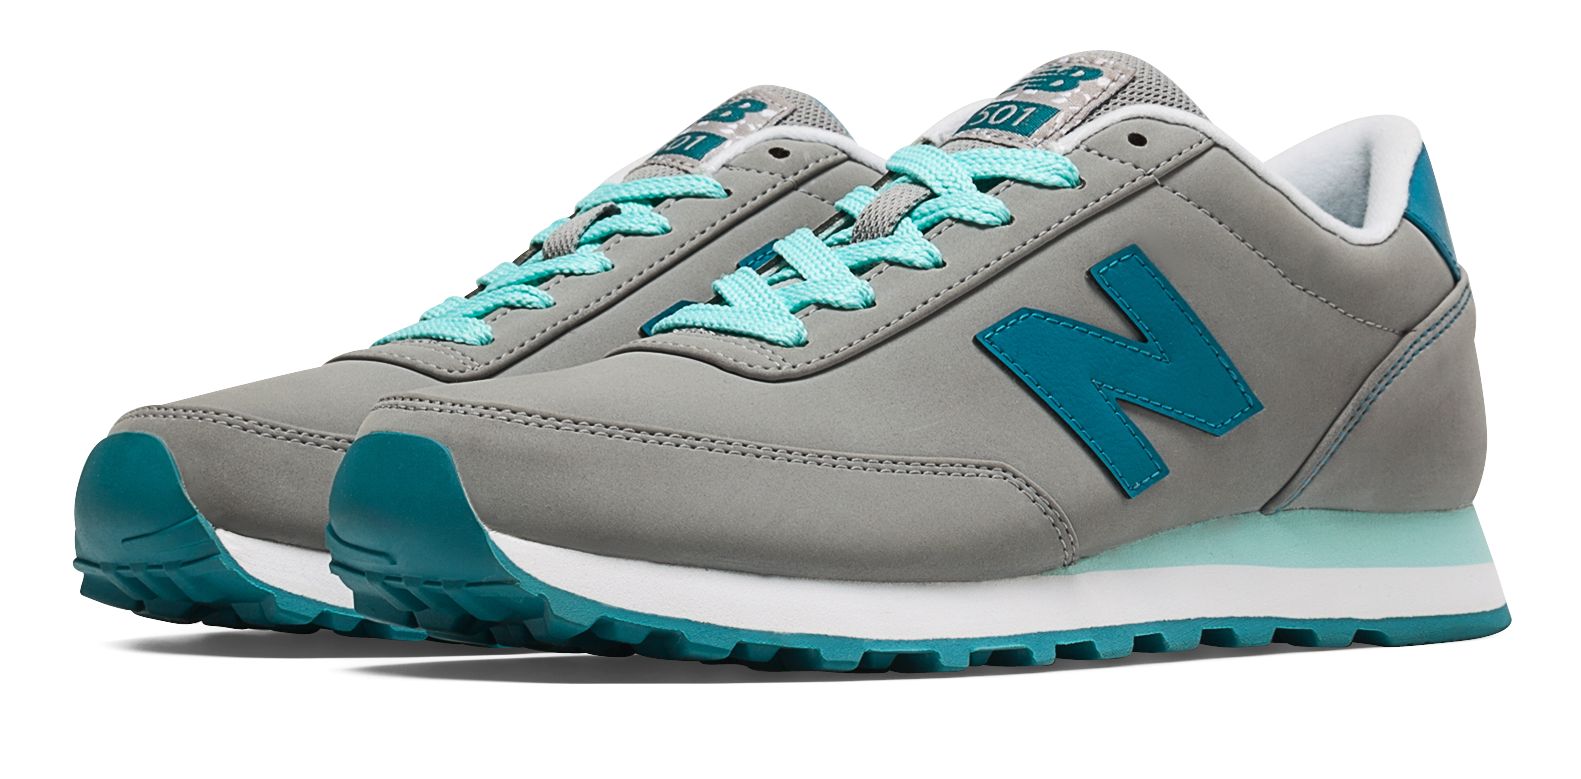 New Balance WL501-C on Sale - Discounts Up to 52% Off on WL501SLB at Joe's New  Balance Outlet